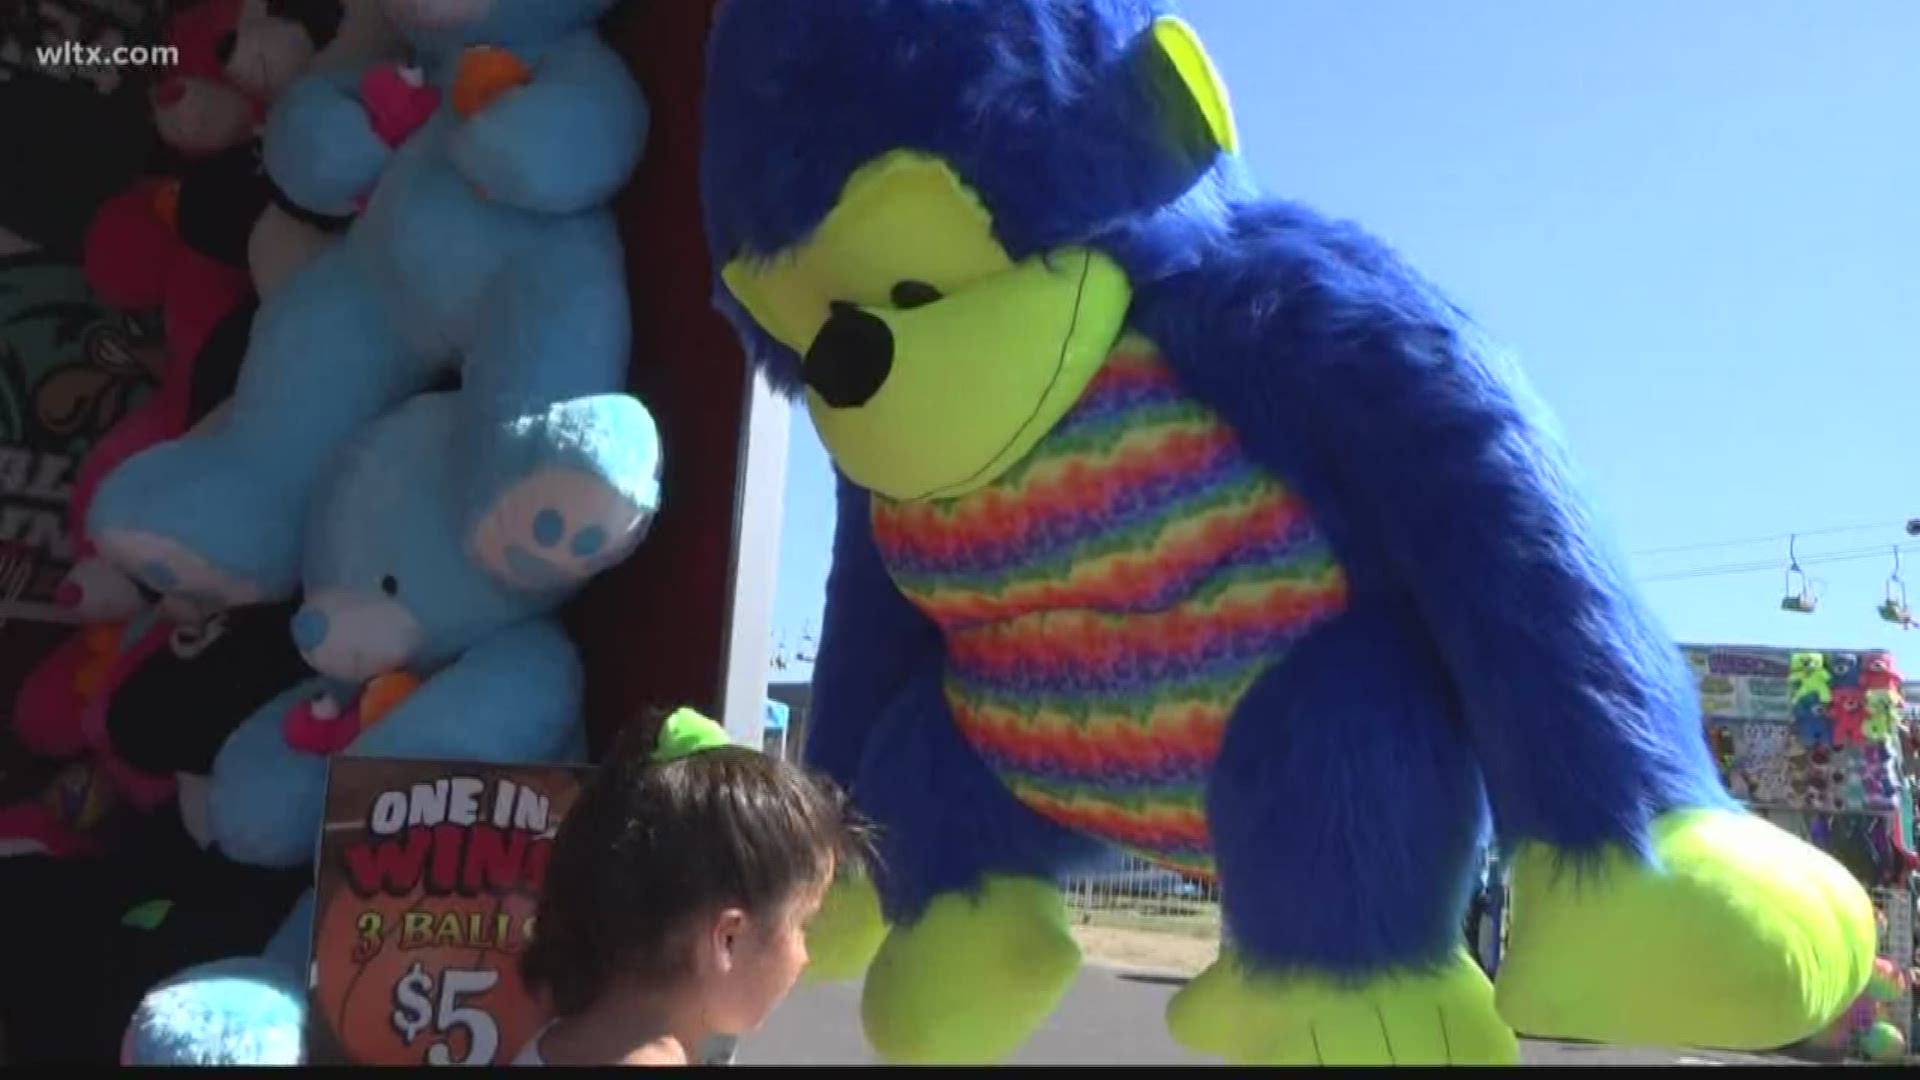 People like Giselle were working to win prizes in basketball at the South Carolina State Fair.